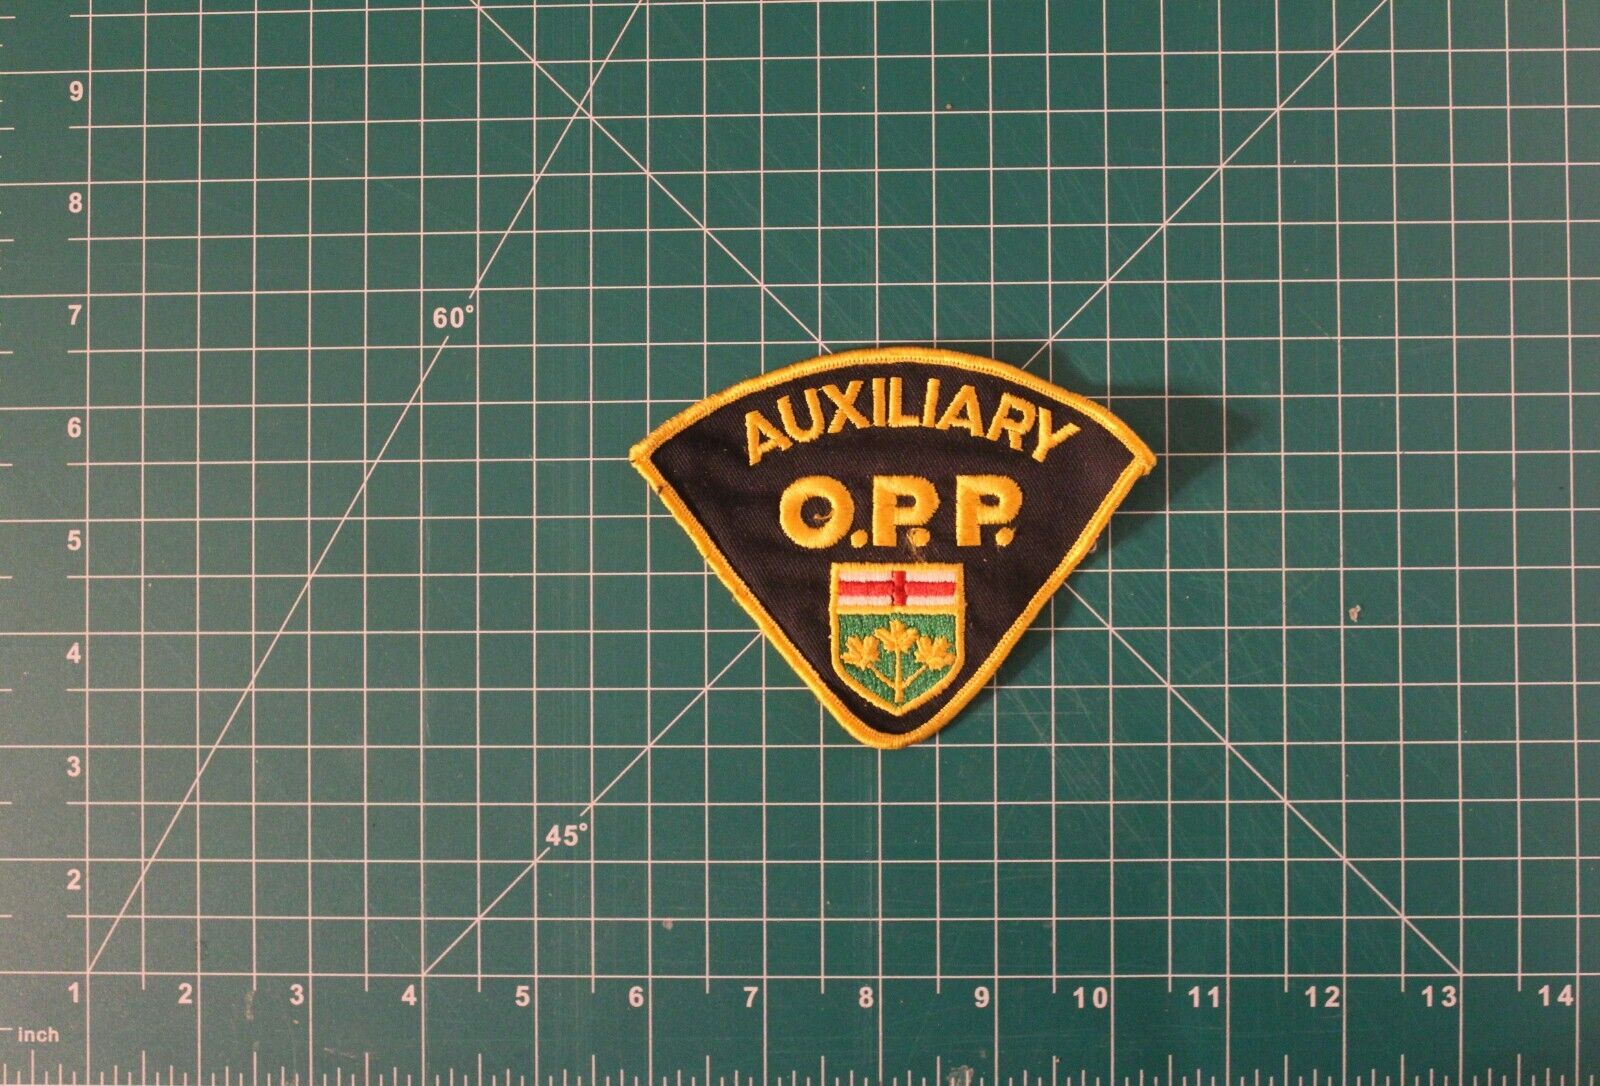 AUXILLARY O.P.P. ONTARIO PROVINCIAL POLICE CANADA Police Patch VINTAGE New